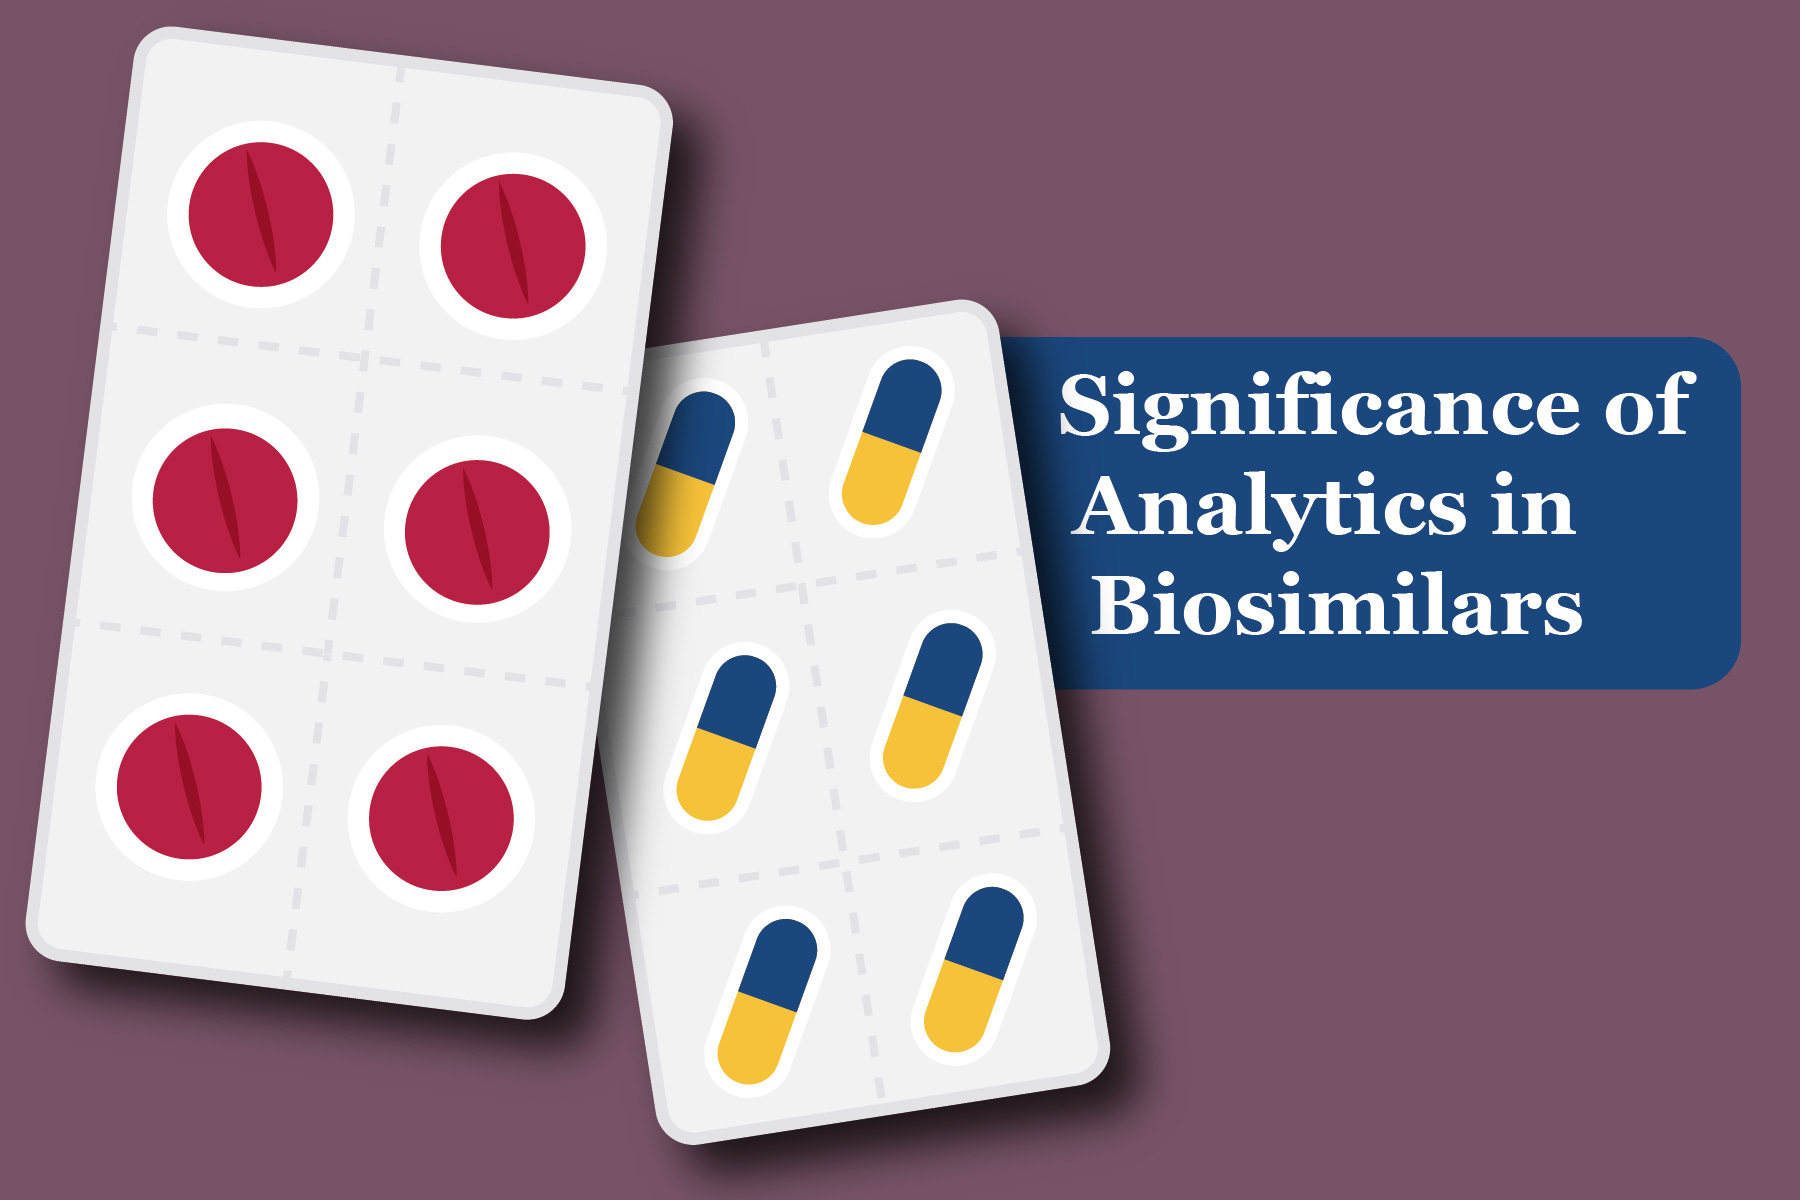 Significance of Analytics in Biosimilars